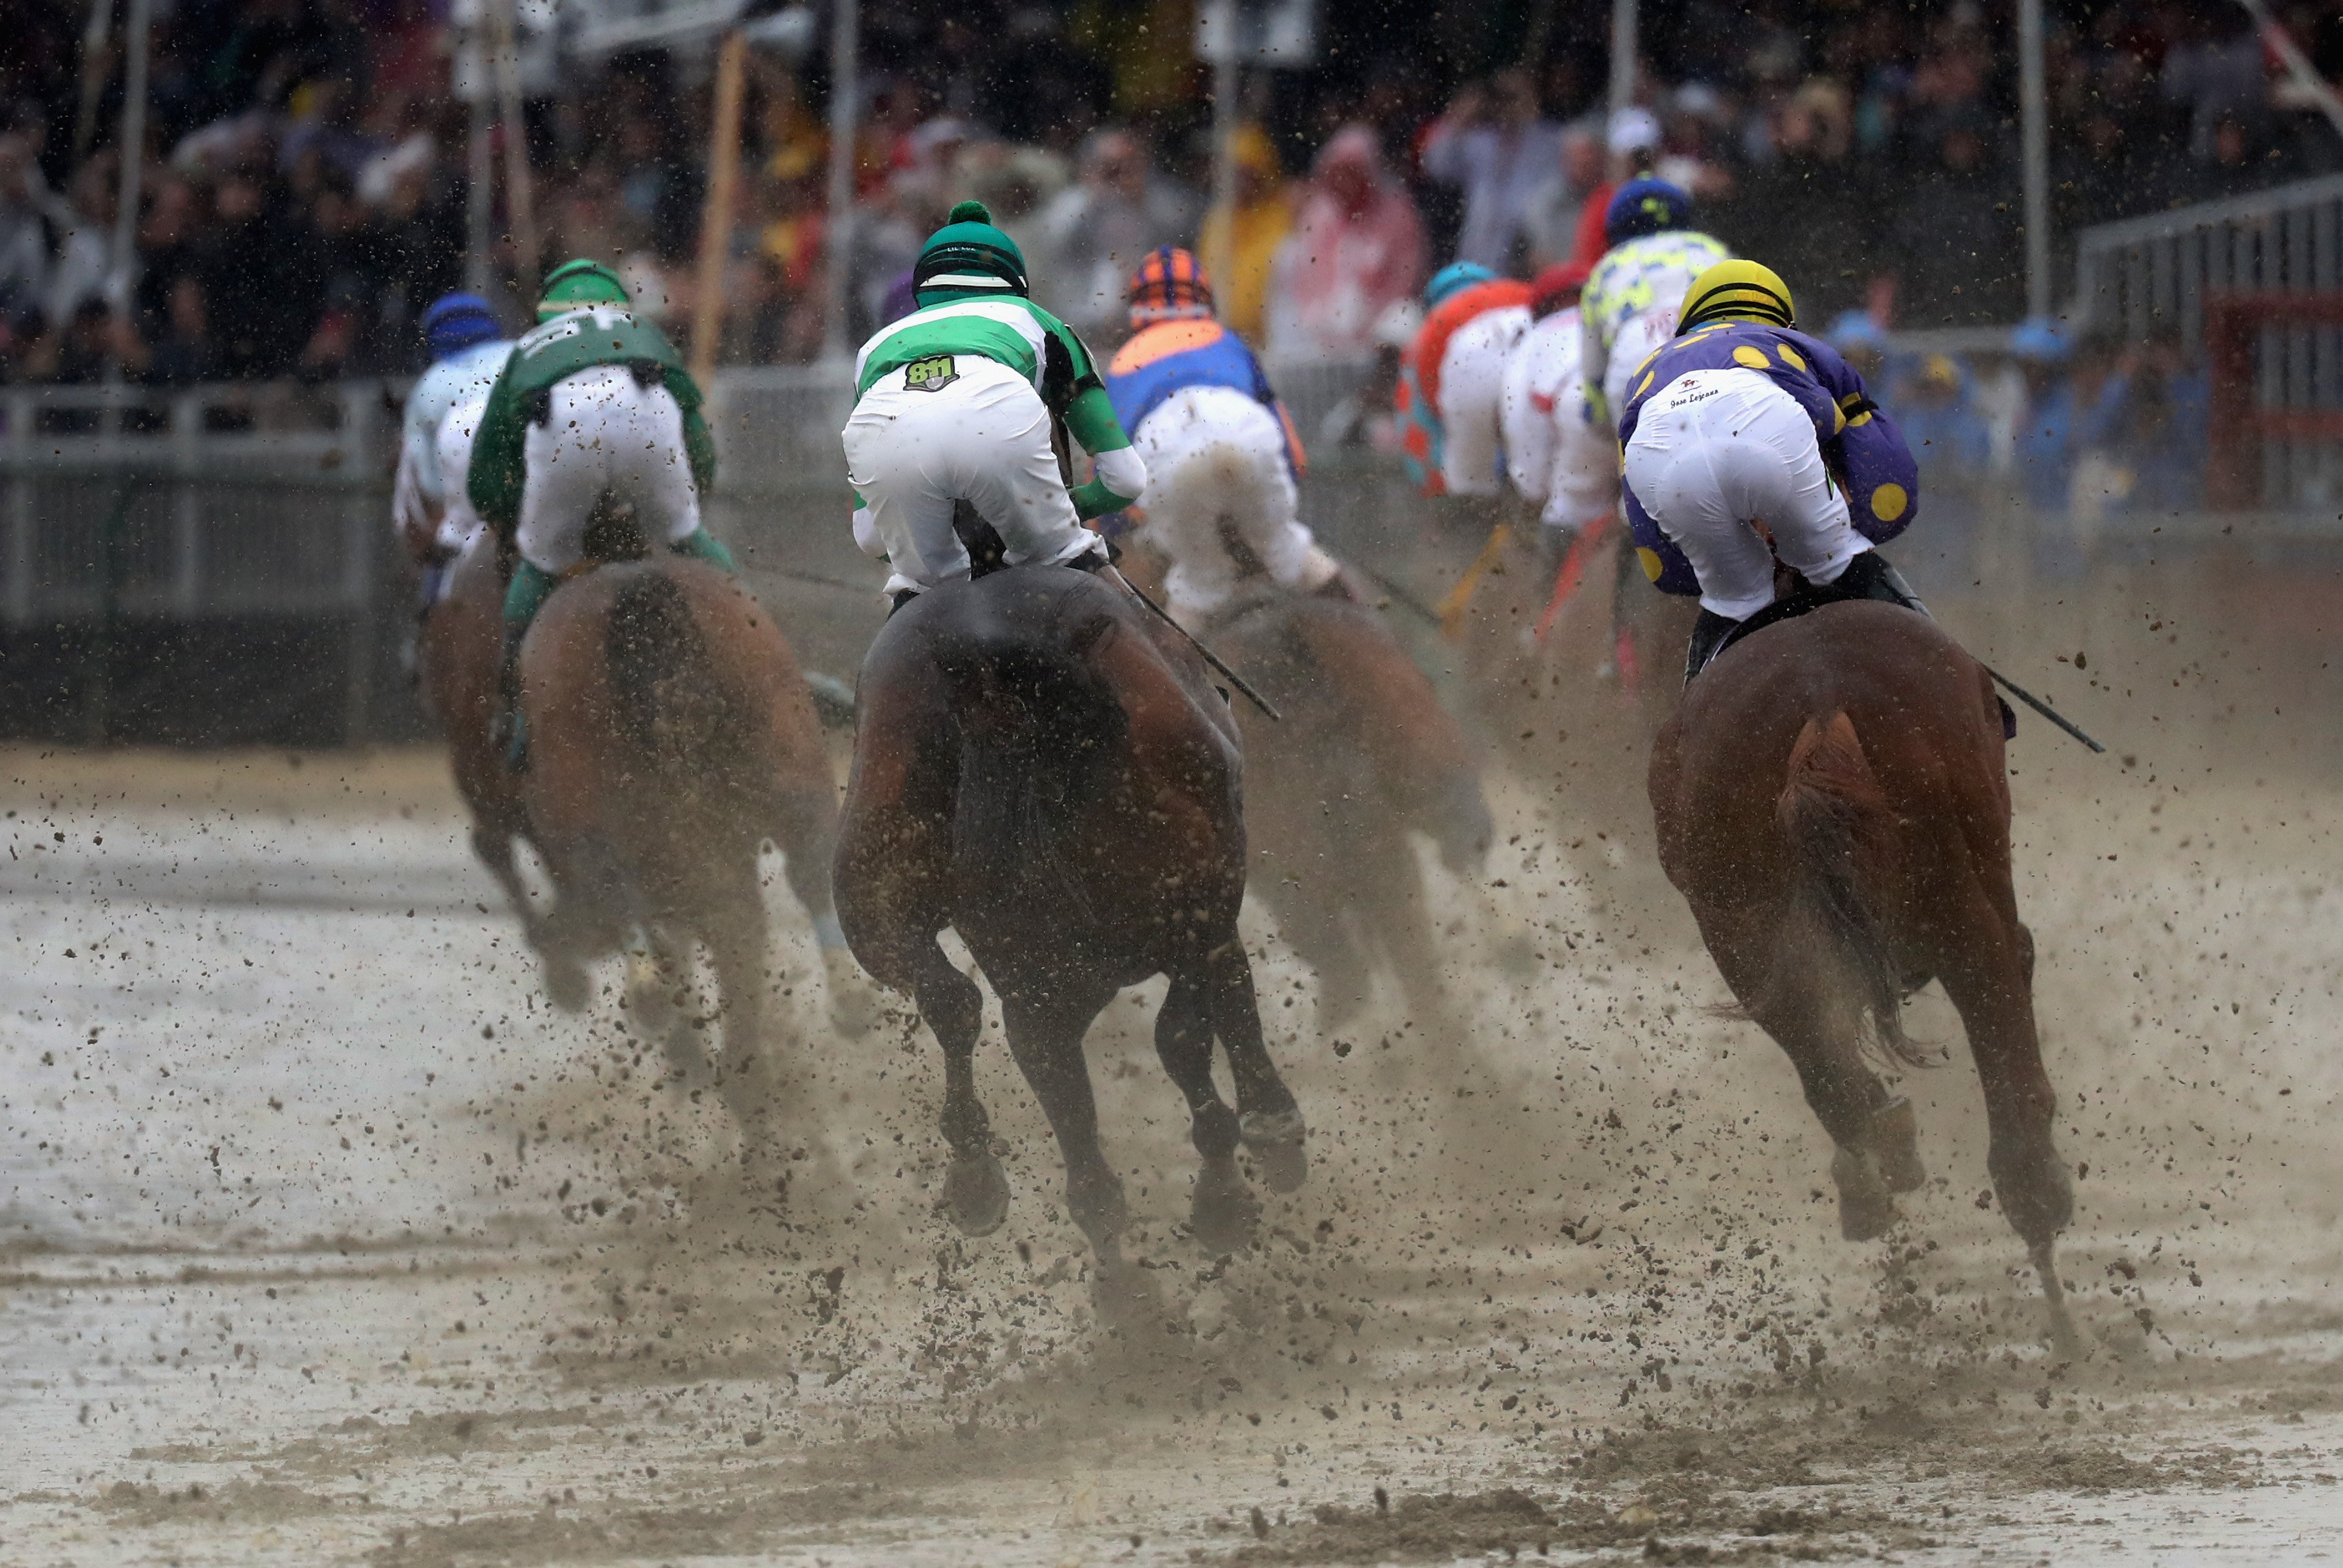 Preakness Jockeys 5 Fast Facts You Need to Know